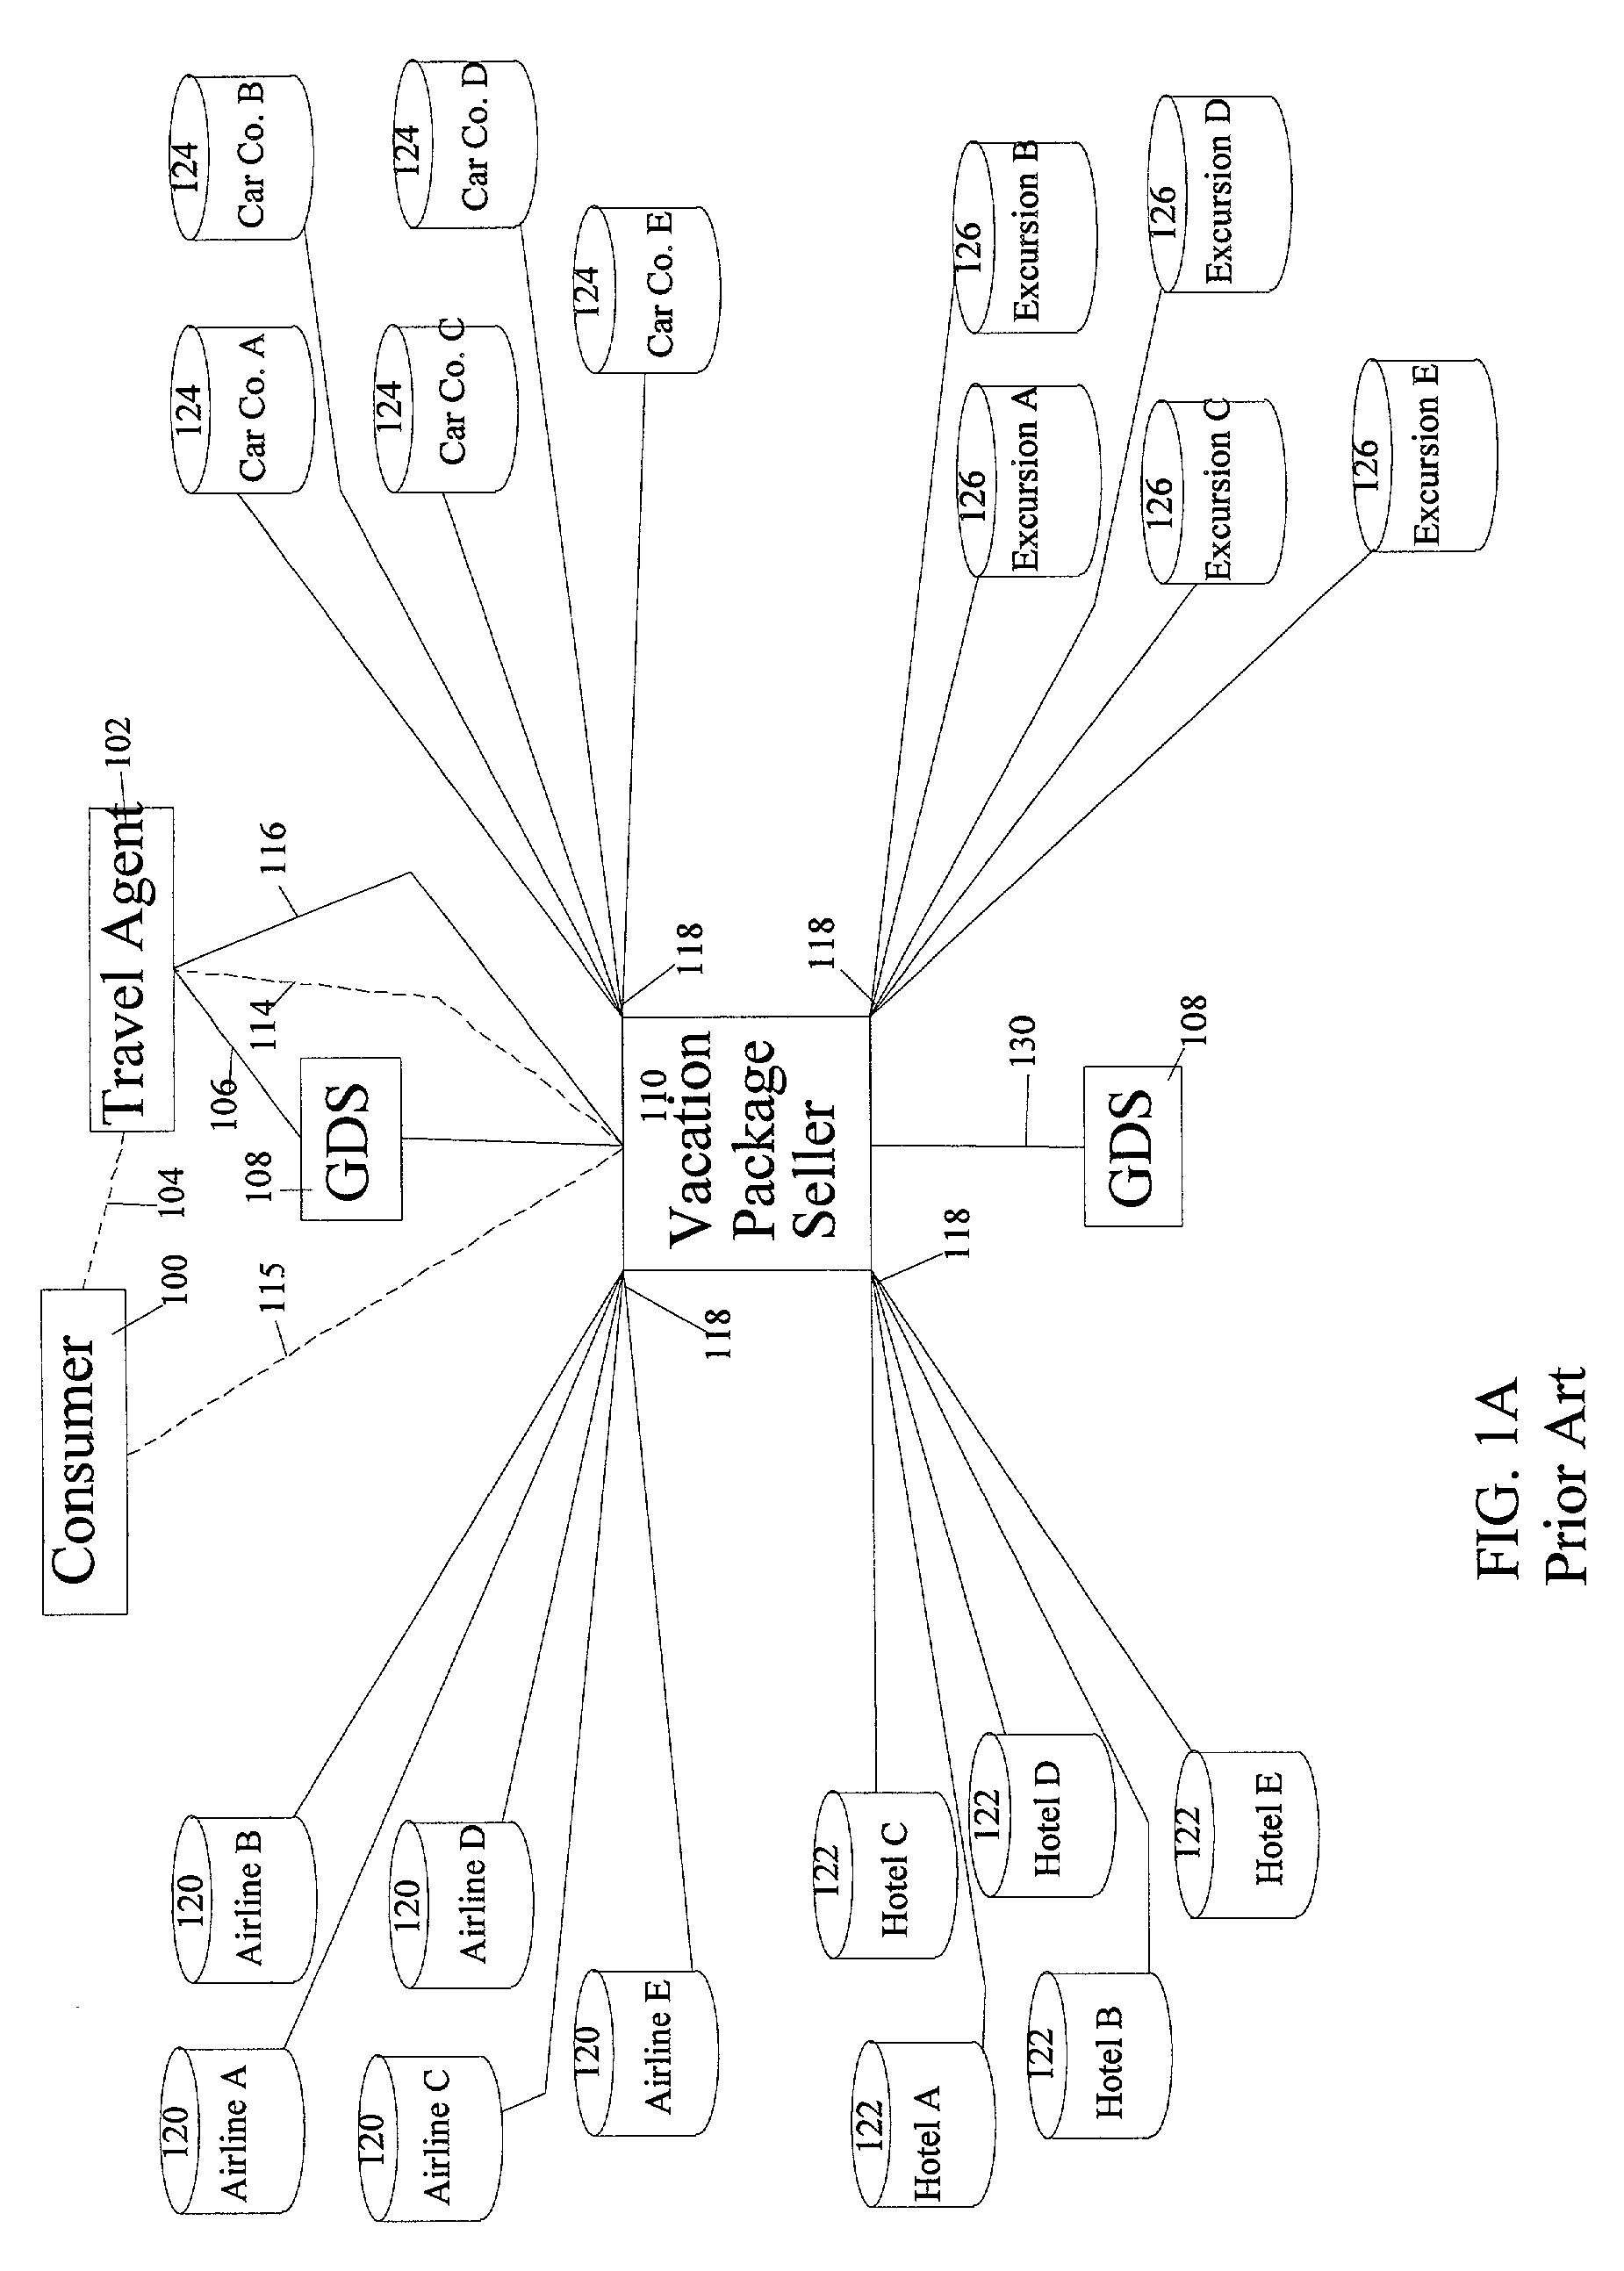 Travel product inventory and rate management system and method